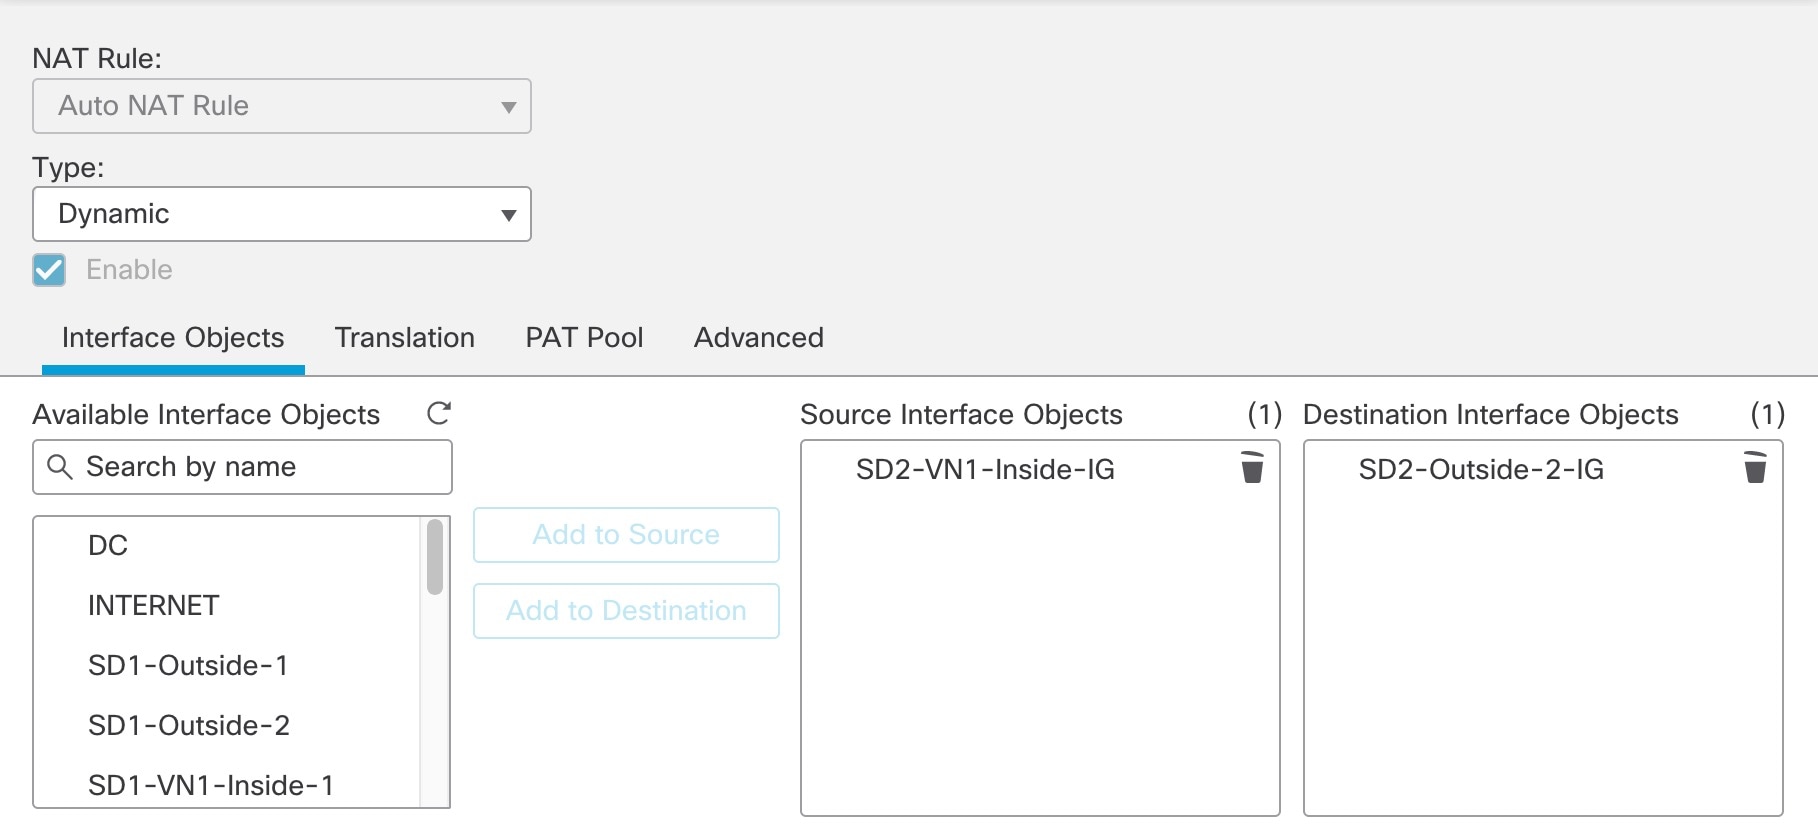 The window displays the NAT Rule and Type drop-down lists, and the Interface Objects tab displays the search bar, where you can add available interface objects to the source or destination.